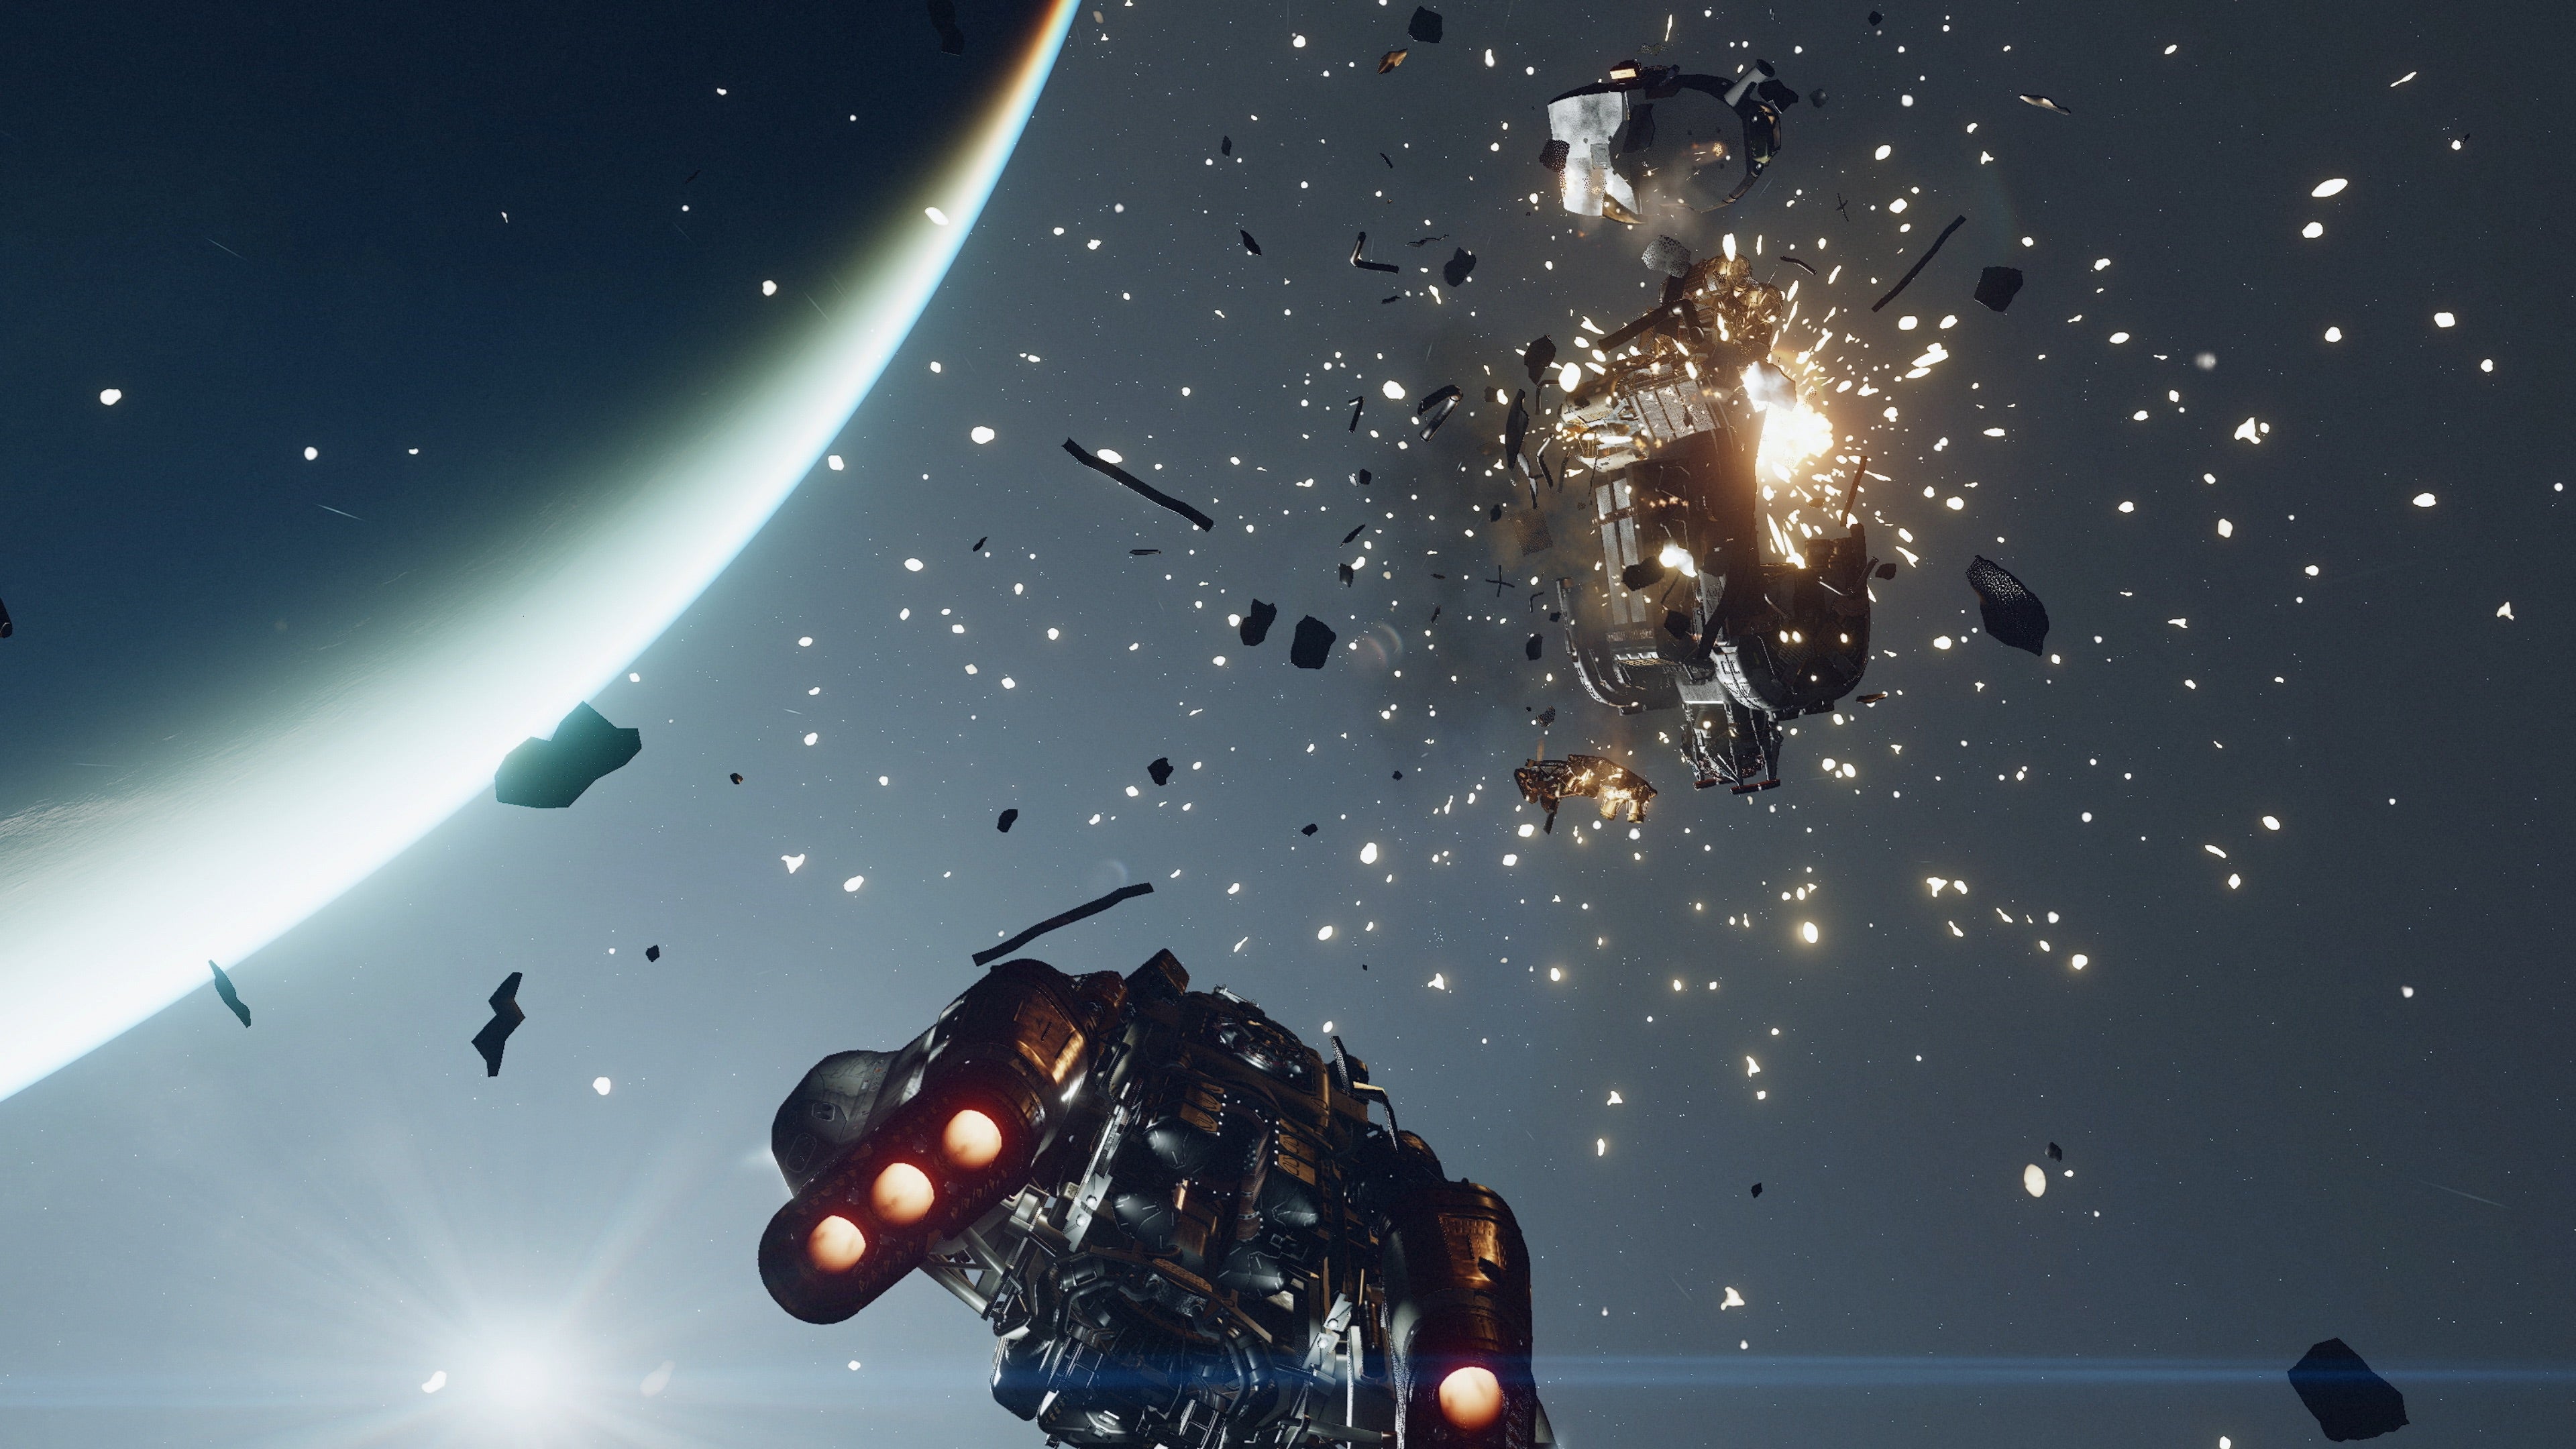 Destroying a spaceship in combat in a Starfield screenshot.